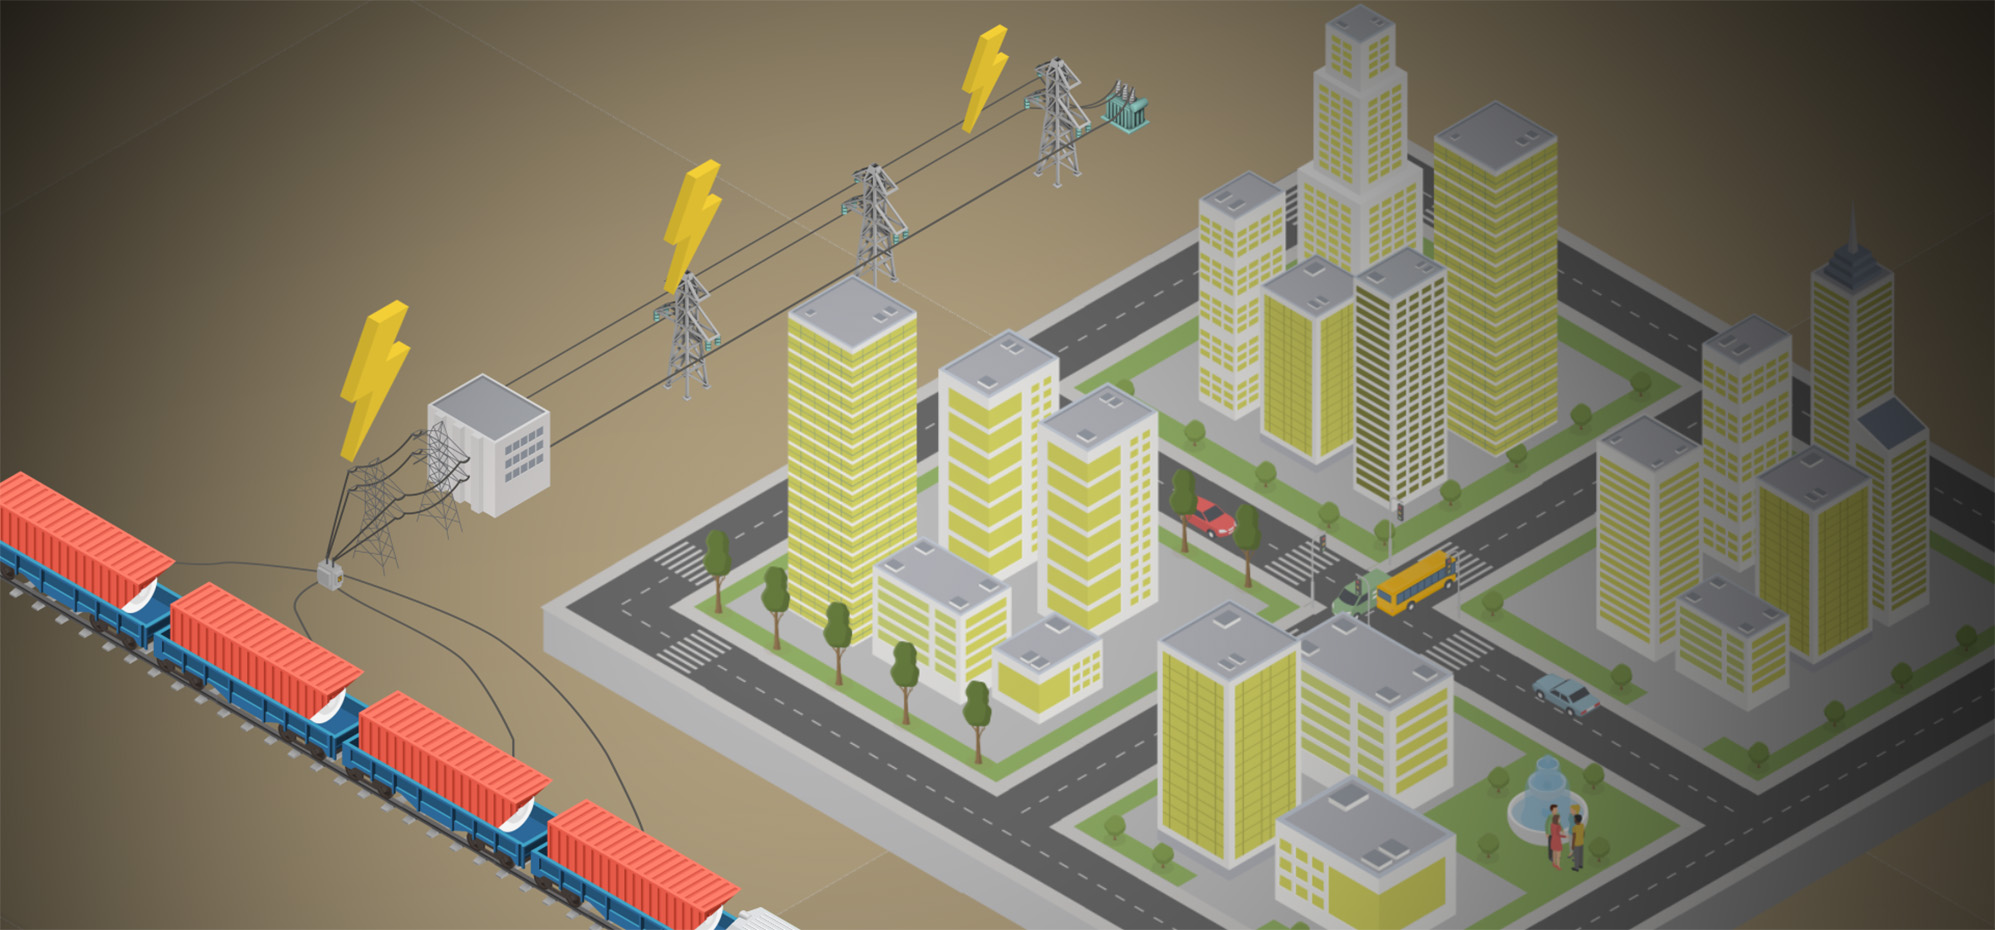 Illustration of a train connected to a city via a power grid.